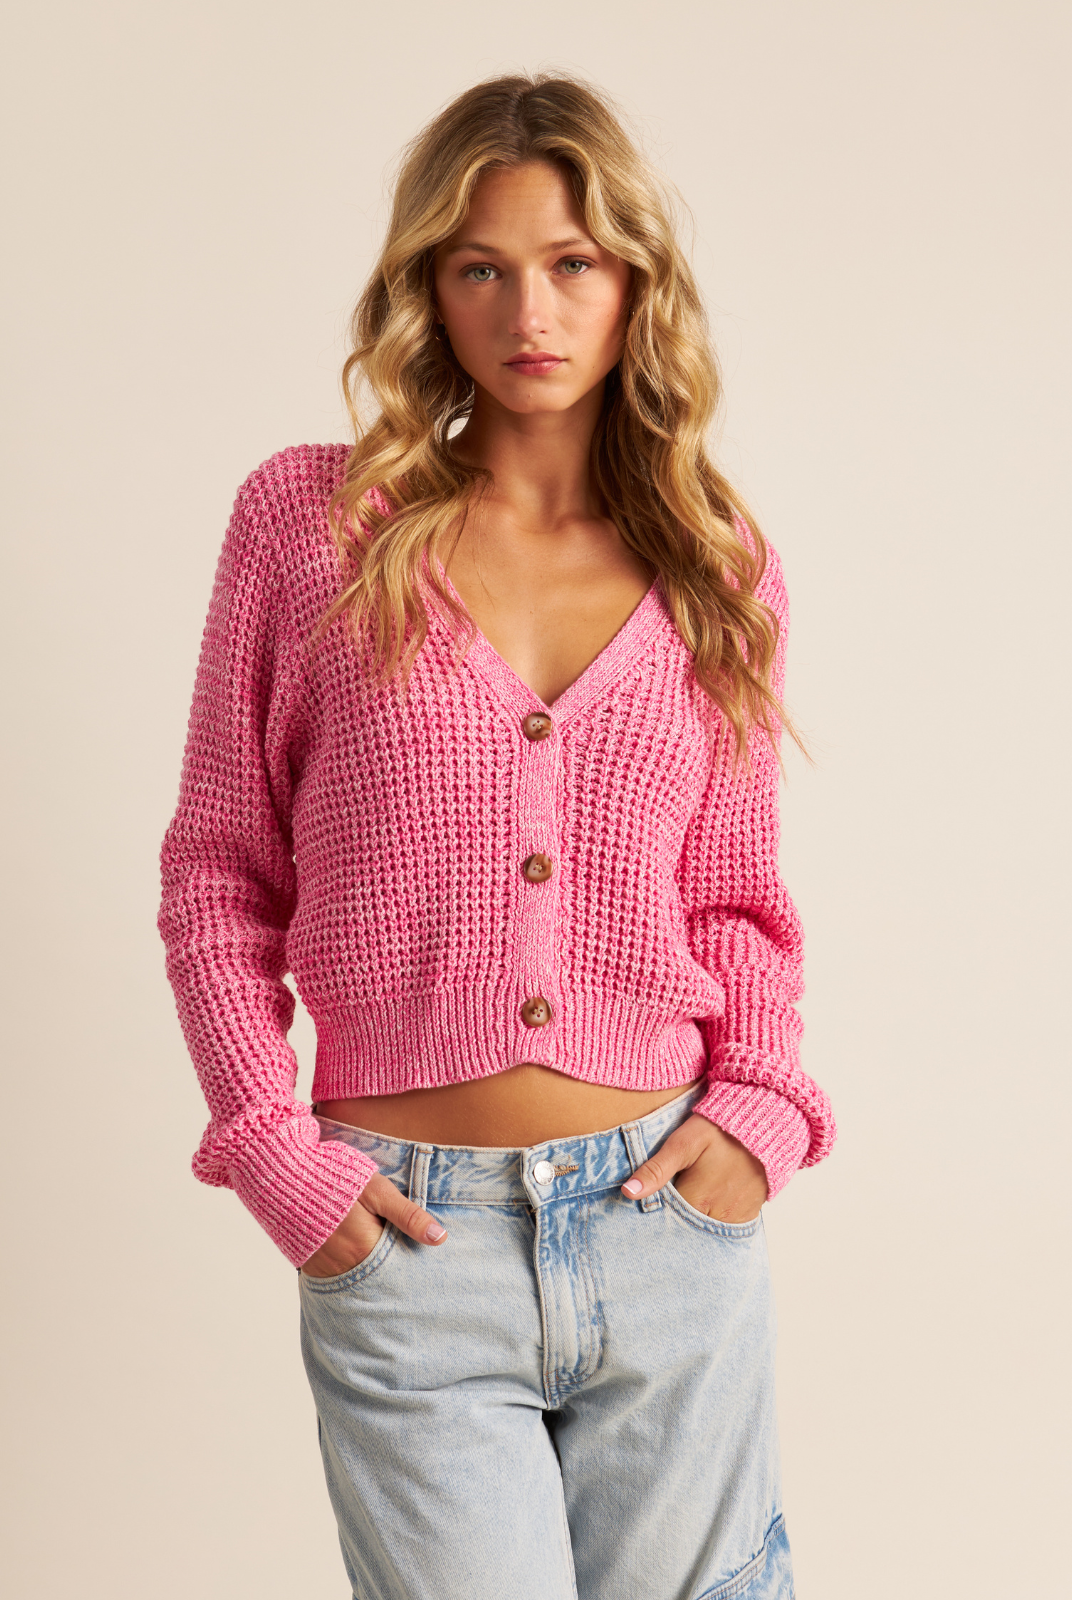 John & Jenn Ollie Cardigan- Shortcake. OLLIE cardigan is crafted from a lightweight cotton featuring a cropped silhouette, airy waffle stitch and three-button front closure.&nbsp;